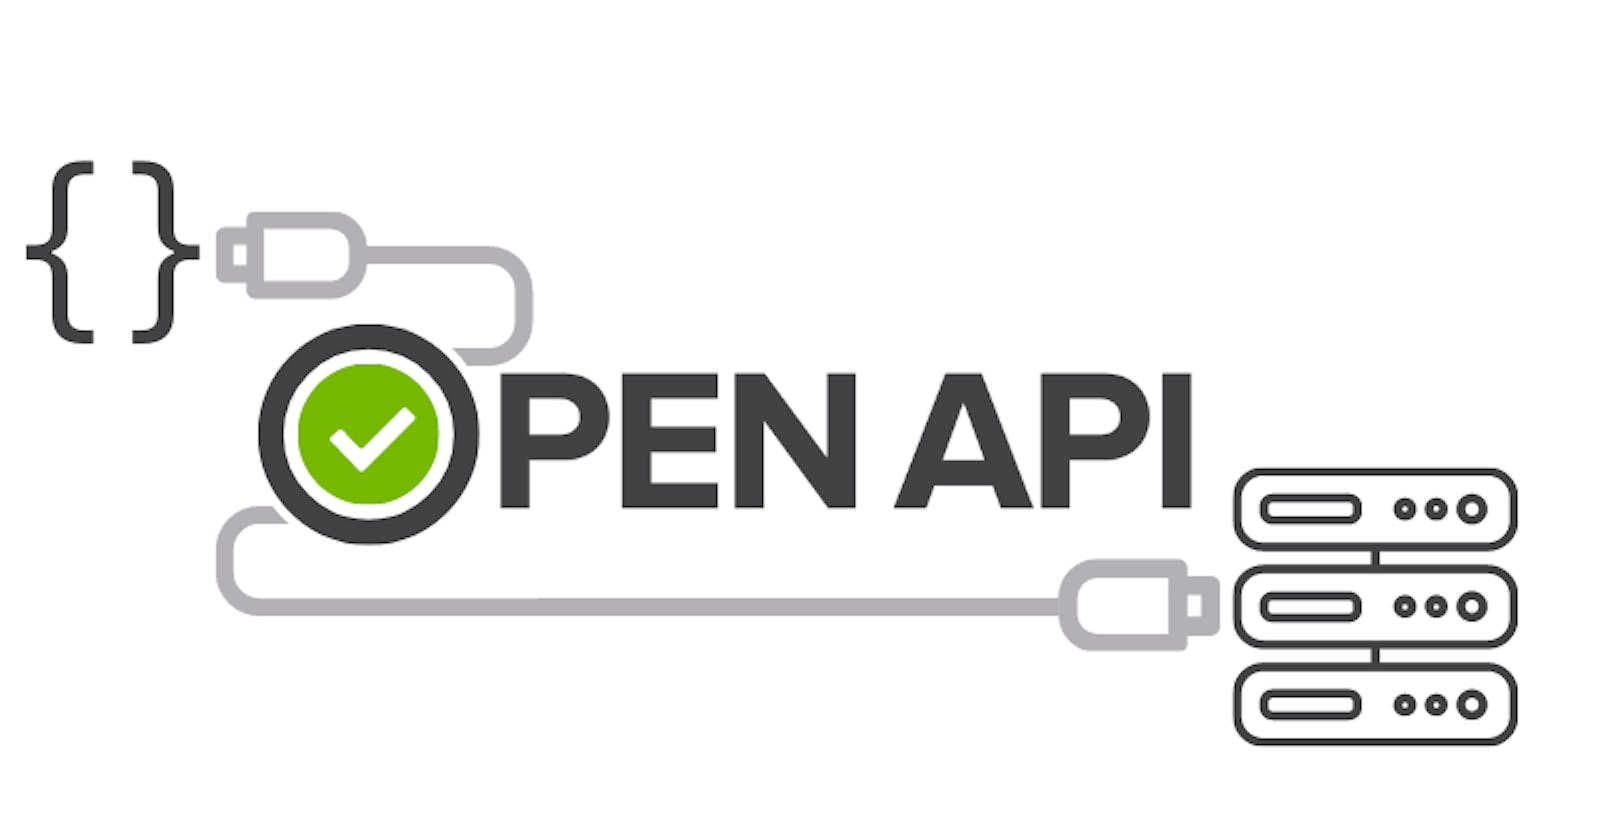 Test-Drive Your API with a Validated OpenAPI Spec